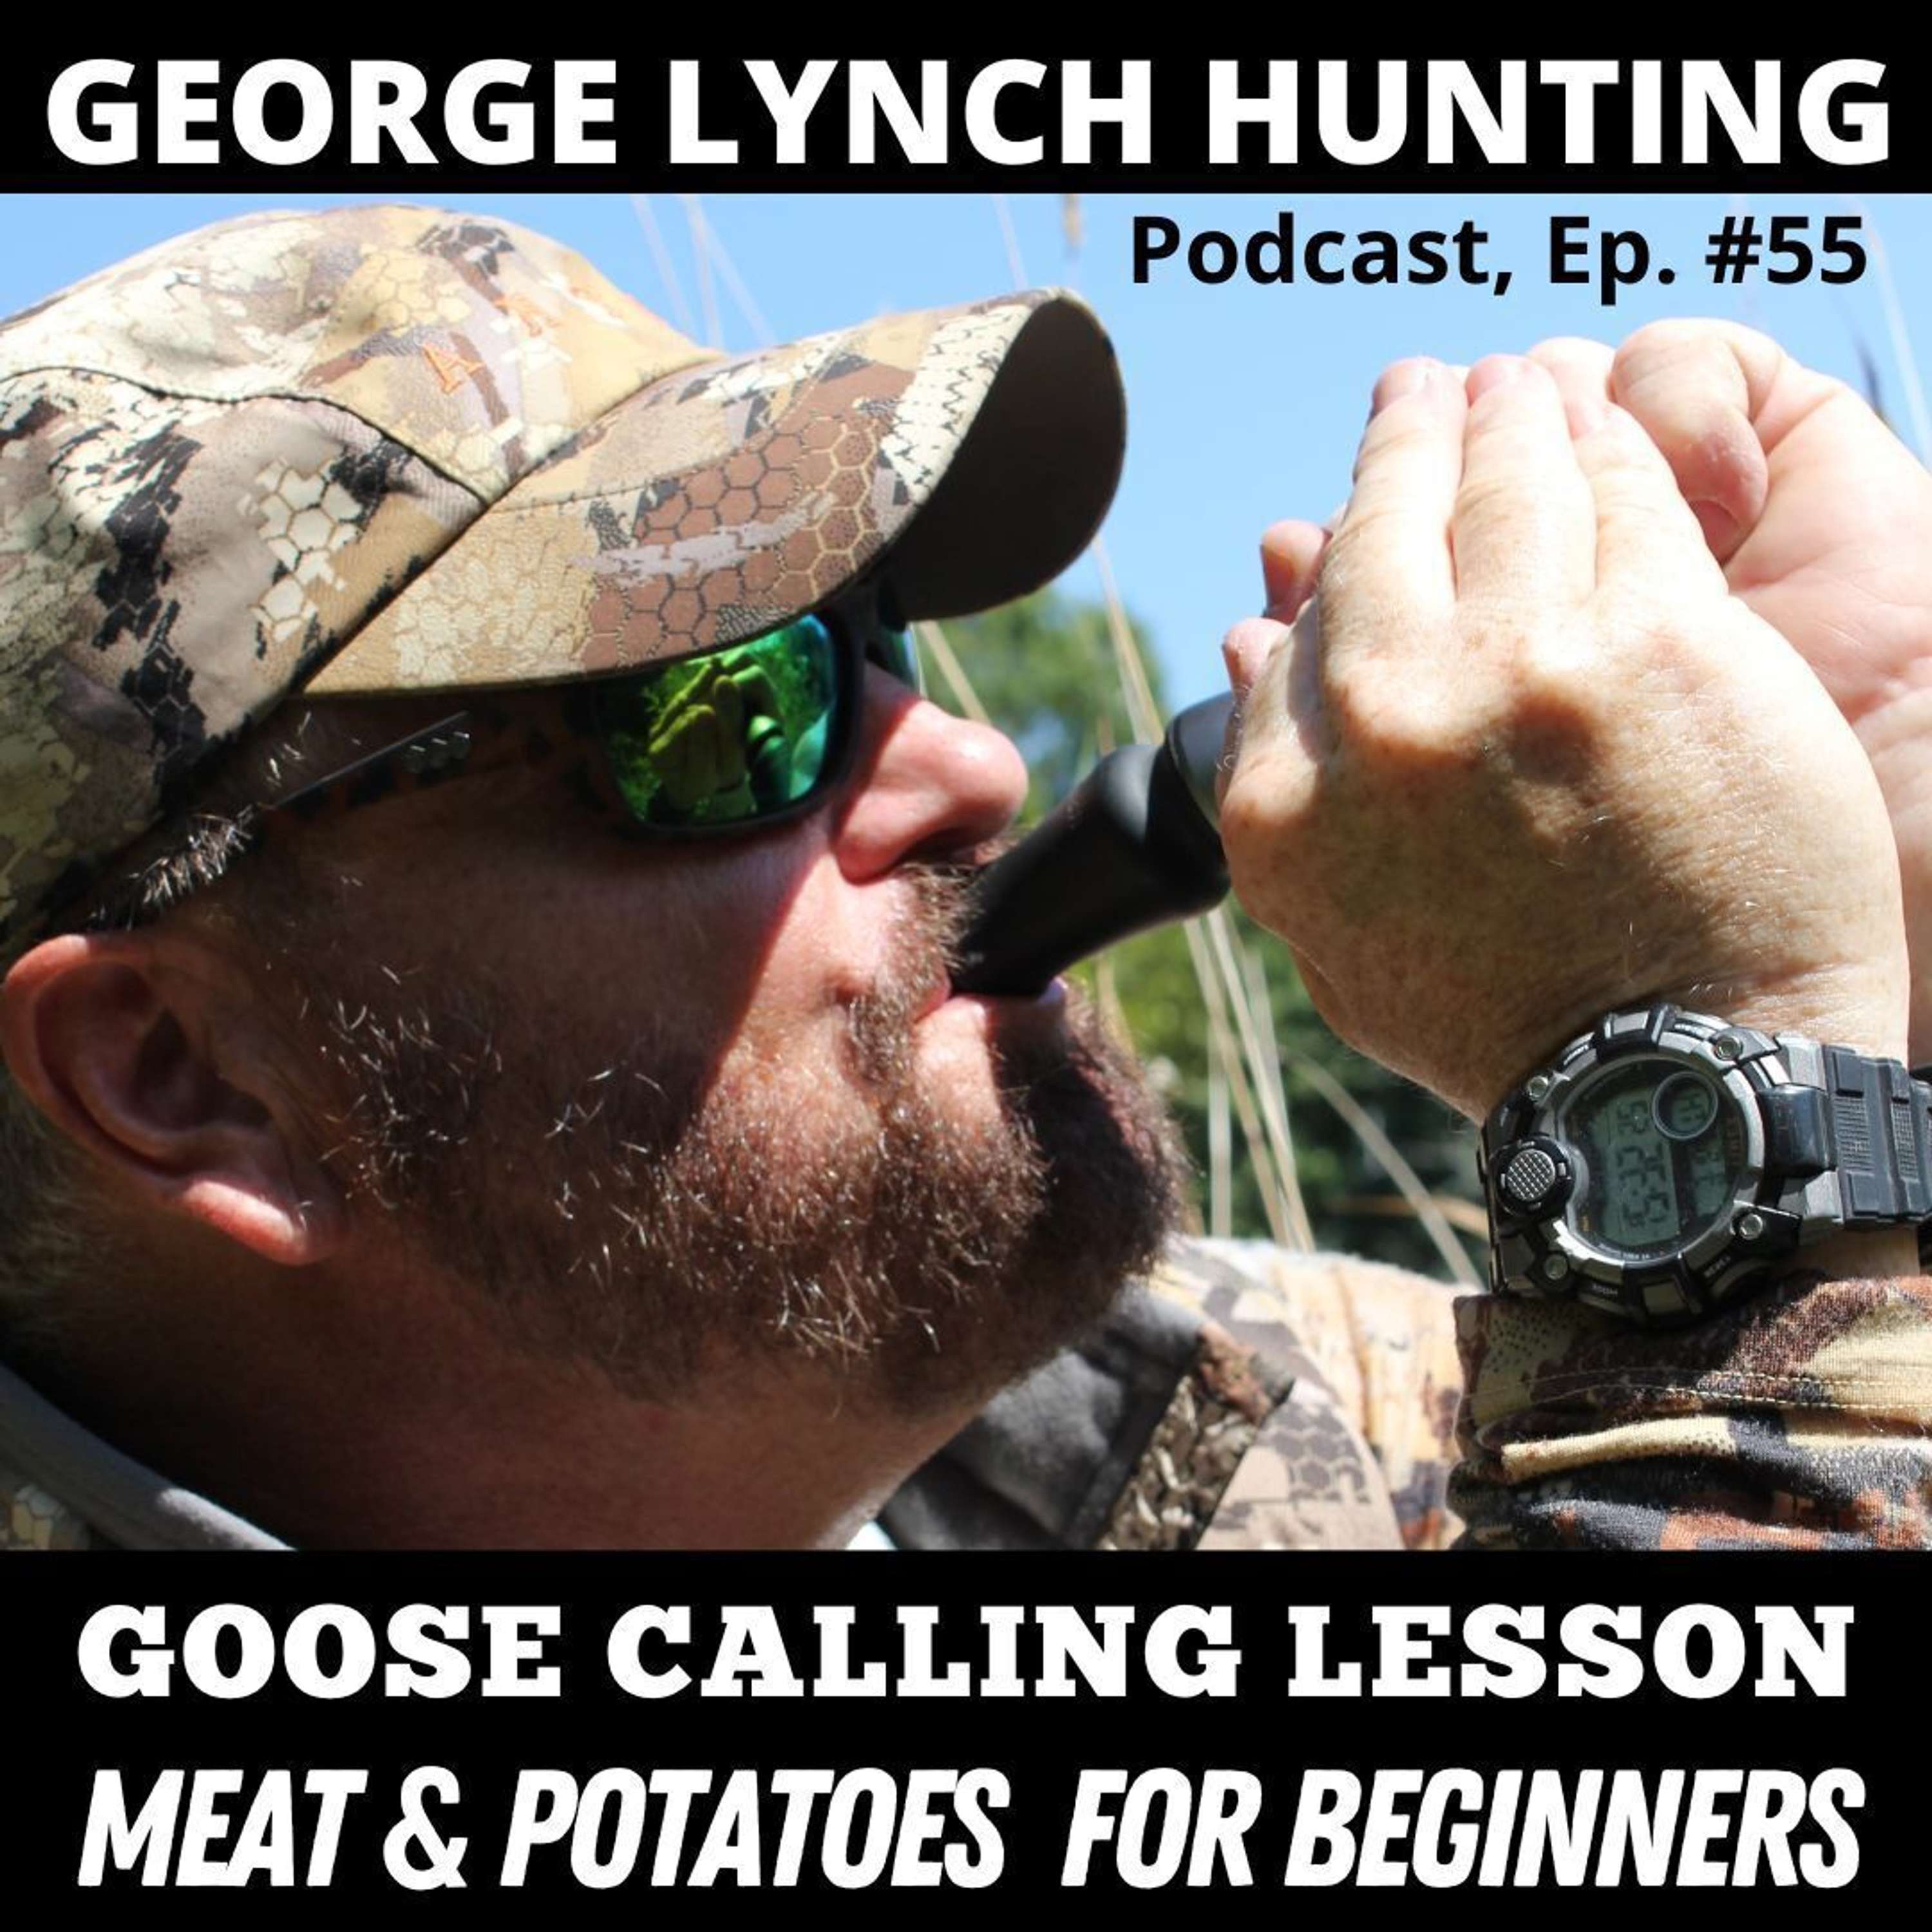 GOOSE CALLING: MEAT & POTATOES CALLING LESSON for BEGINNERS by GEORGE LYNCH